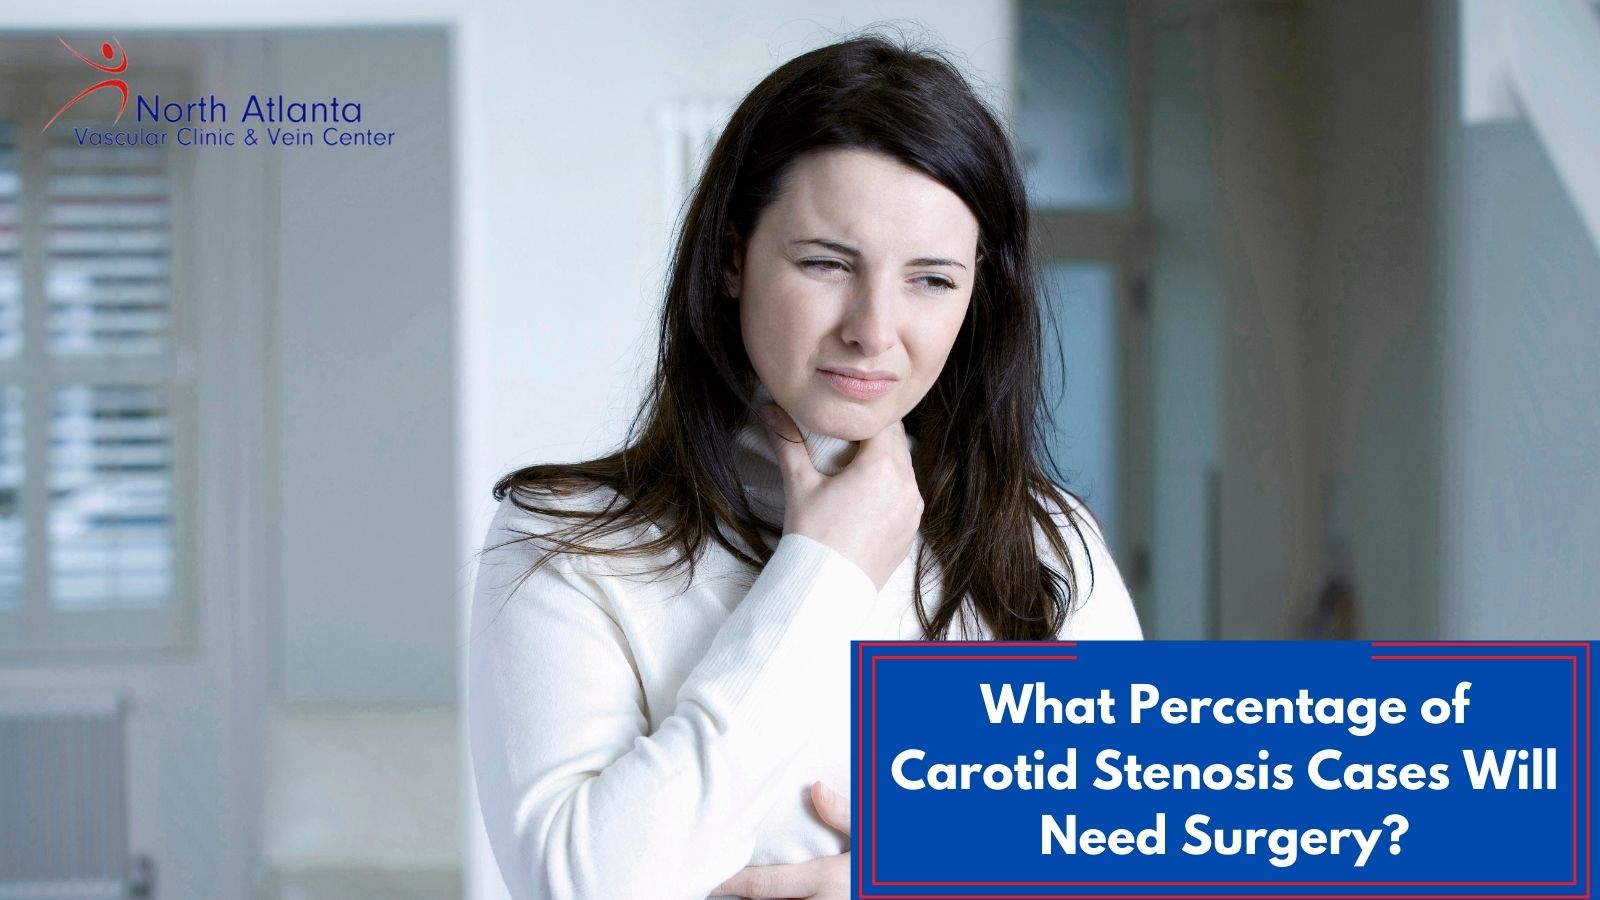 What Percentage of Carotid Stenosis Cases Will Need Surgery?